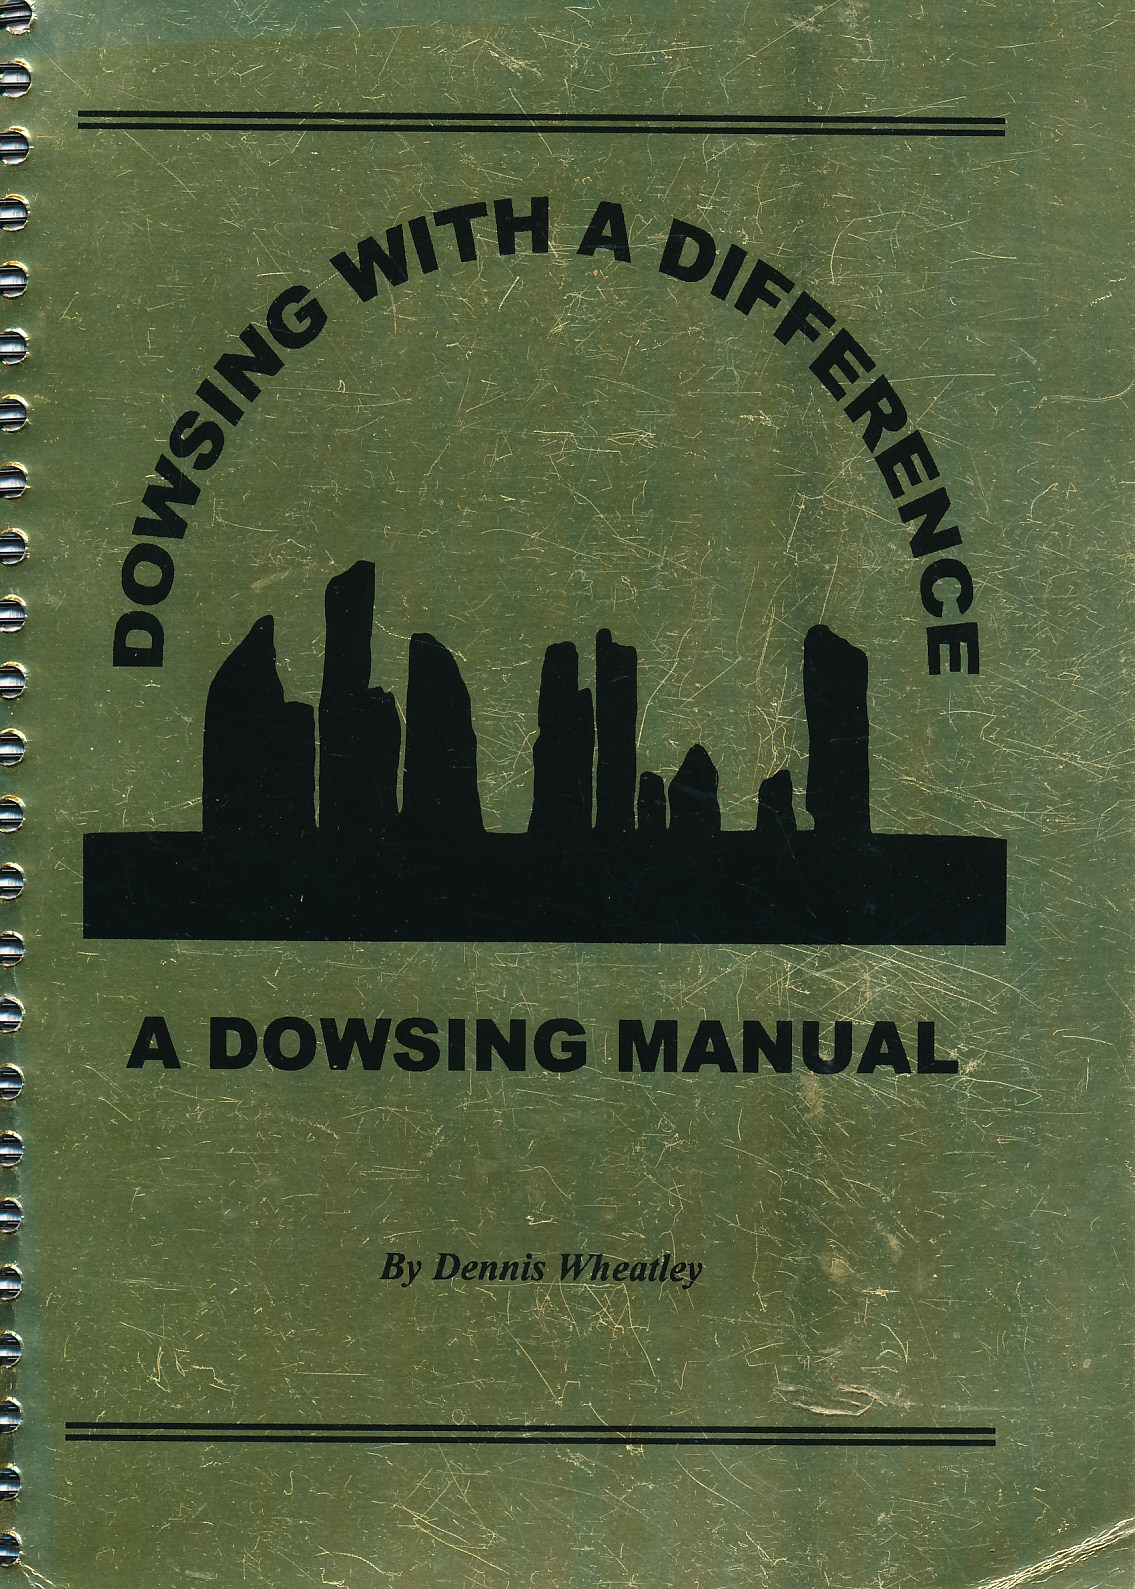 Dowsing with a Difference. A Dowsing Manual.